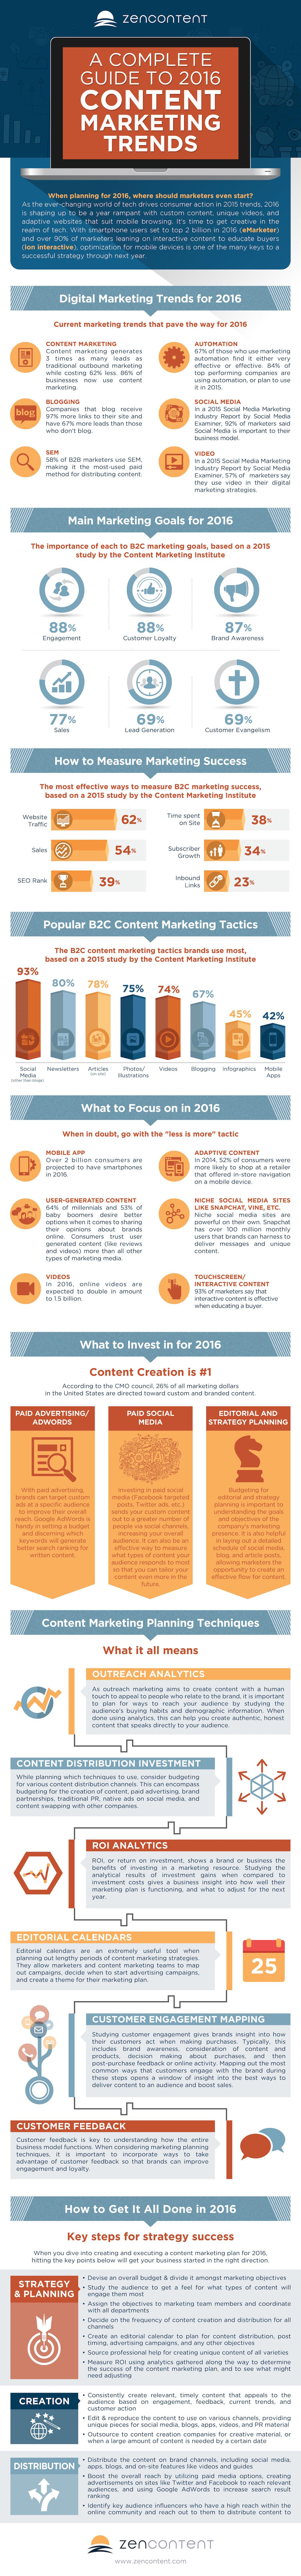 2016 Content Marketing Guide Infographic